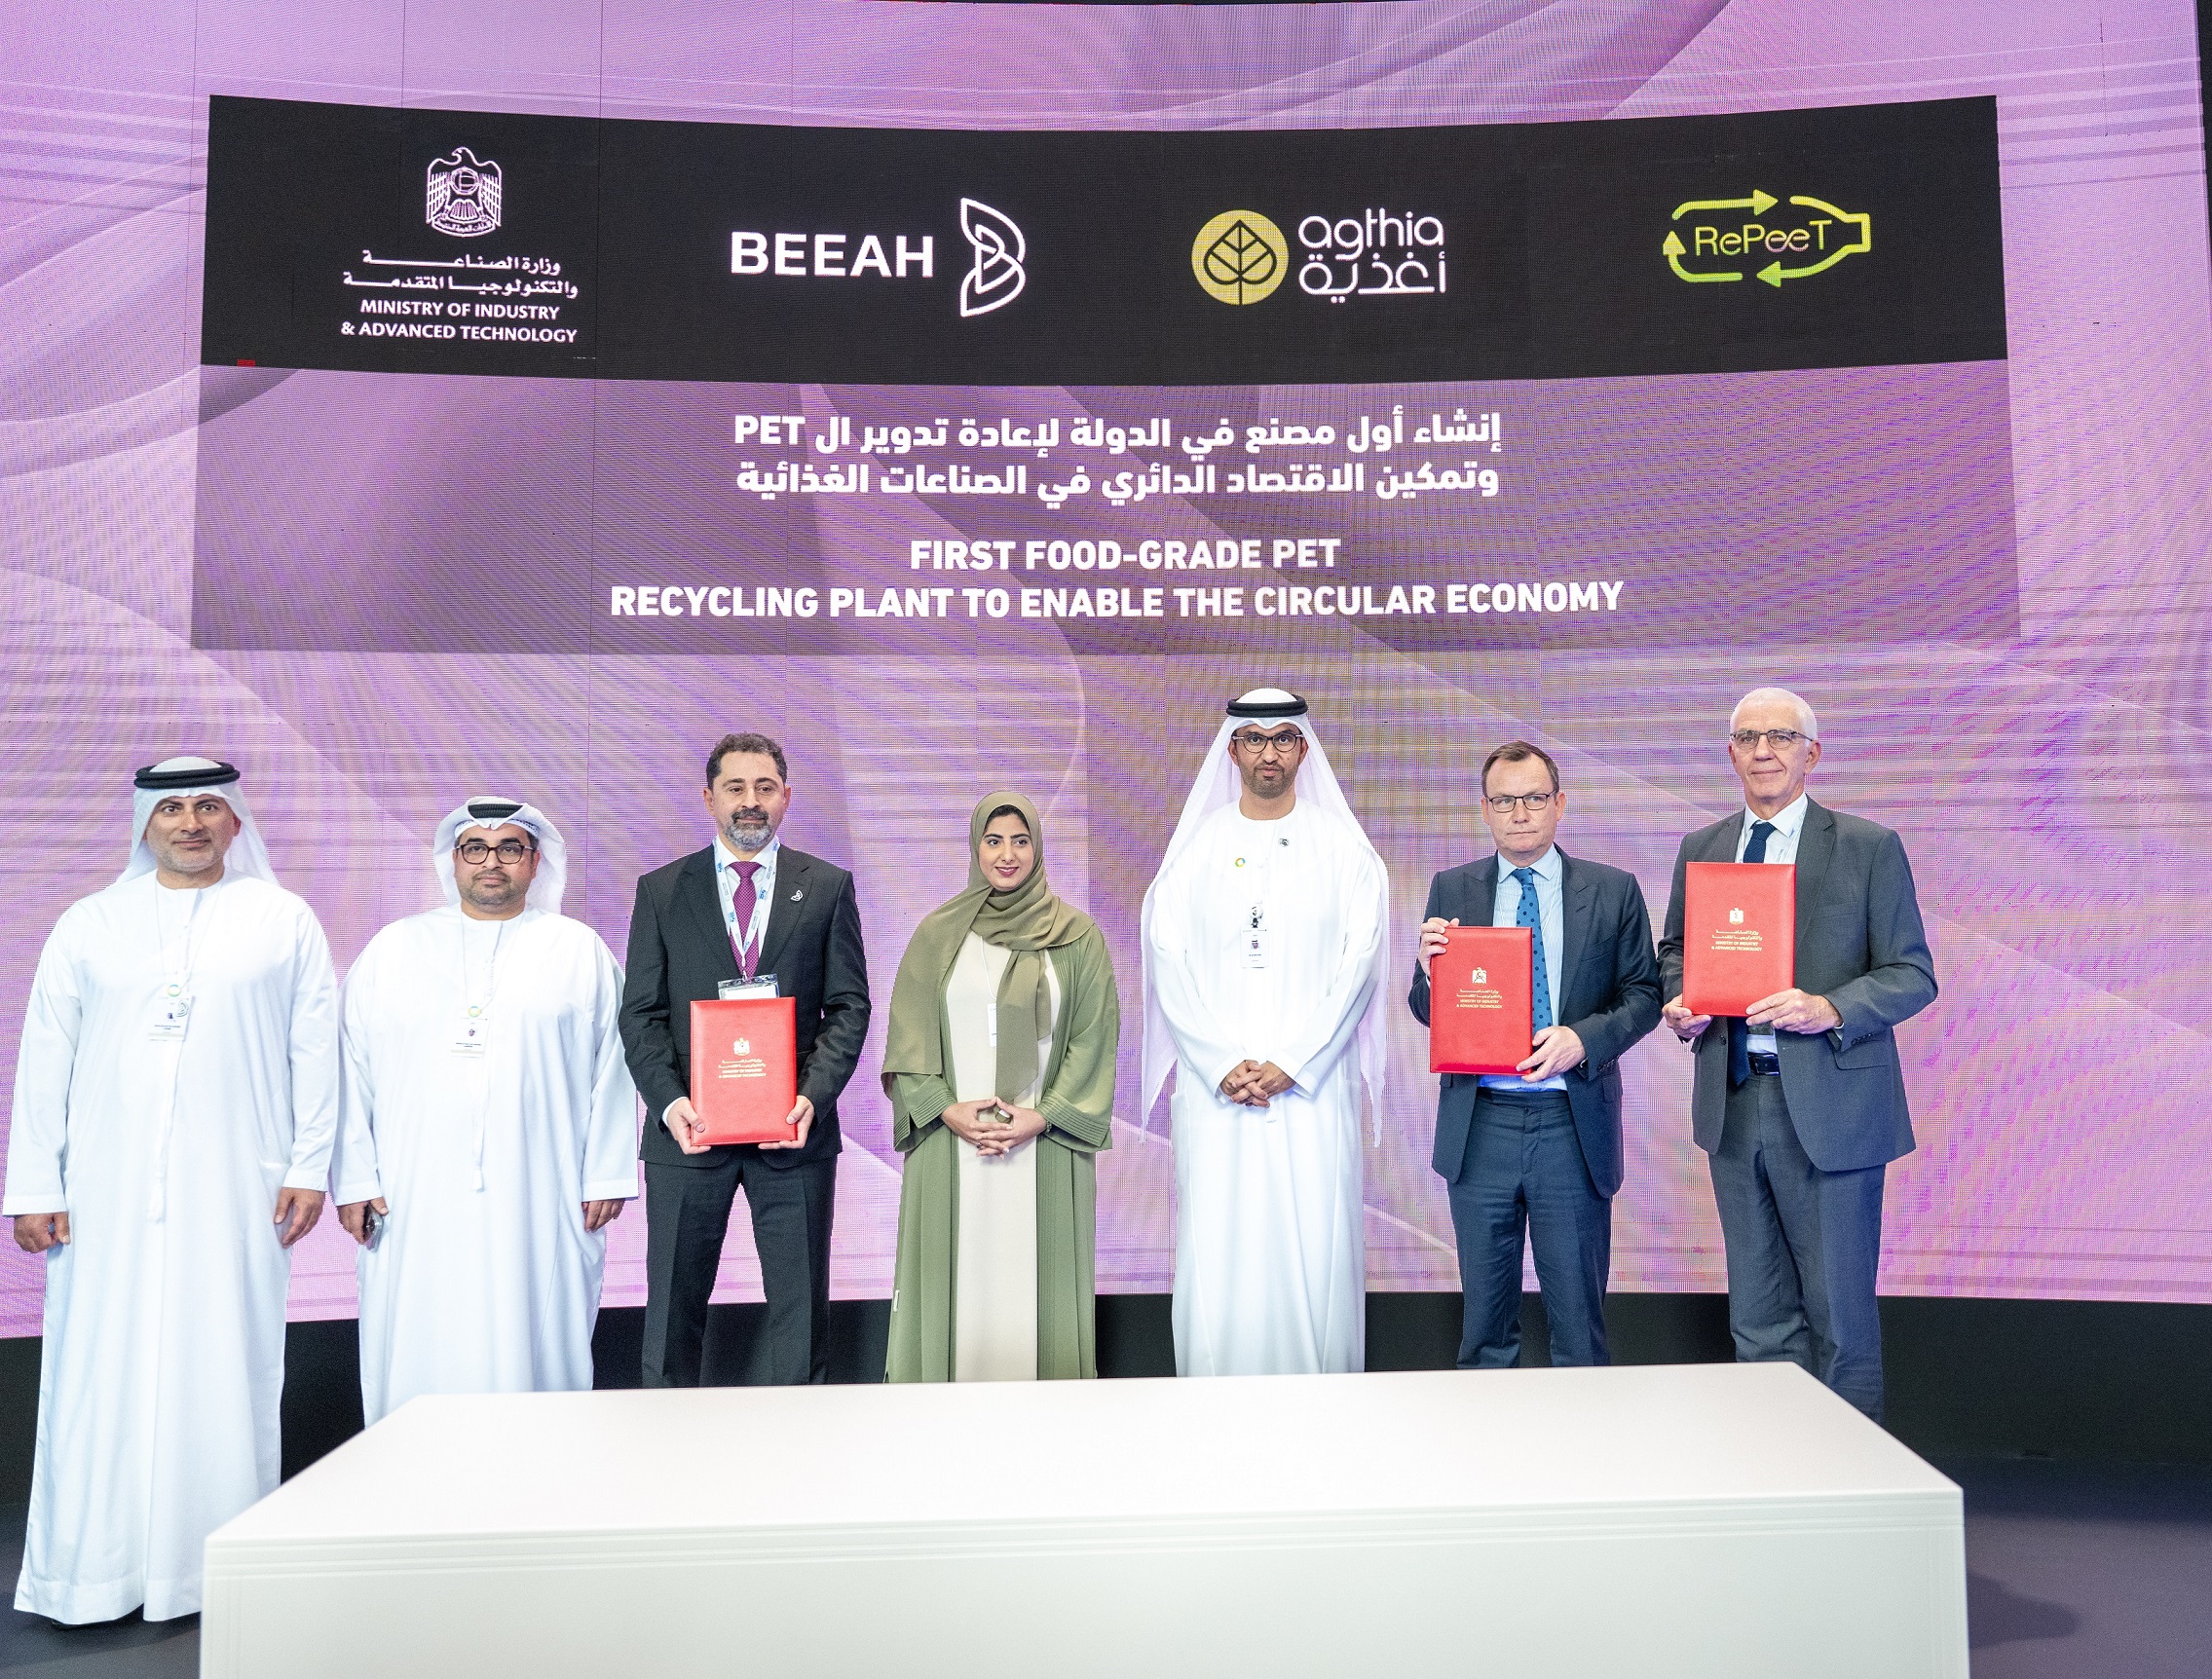 UAE plans the first food-grade plastic recycling plant to help promote circular economy and growth of sustainable industries